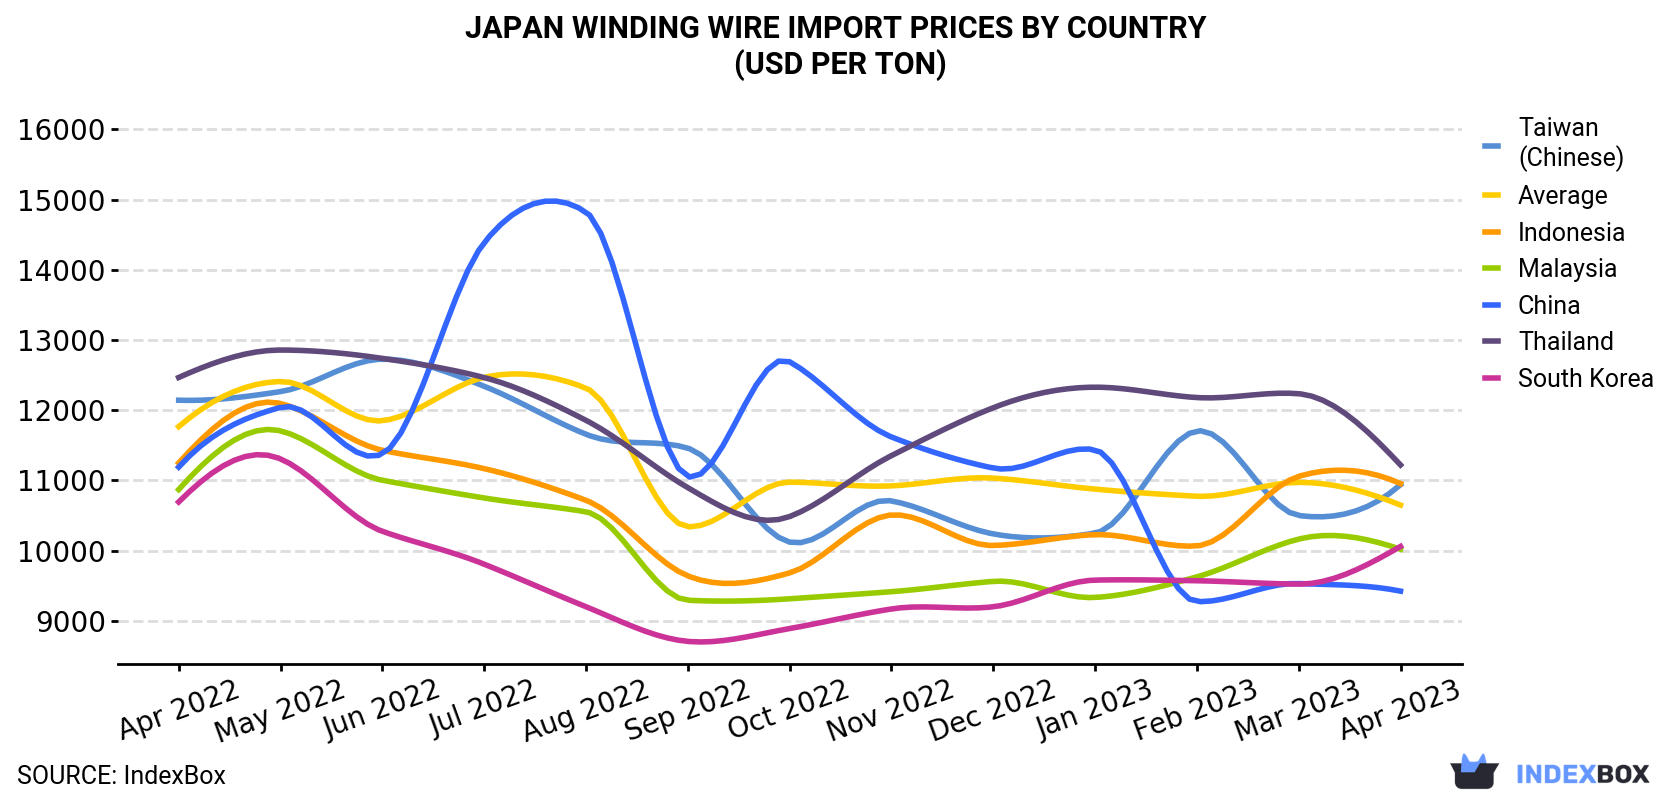 Japan Winding Wire Import Prices By Country (USD Per Ton)